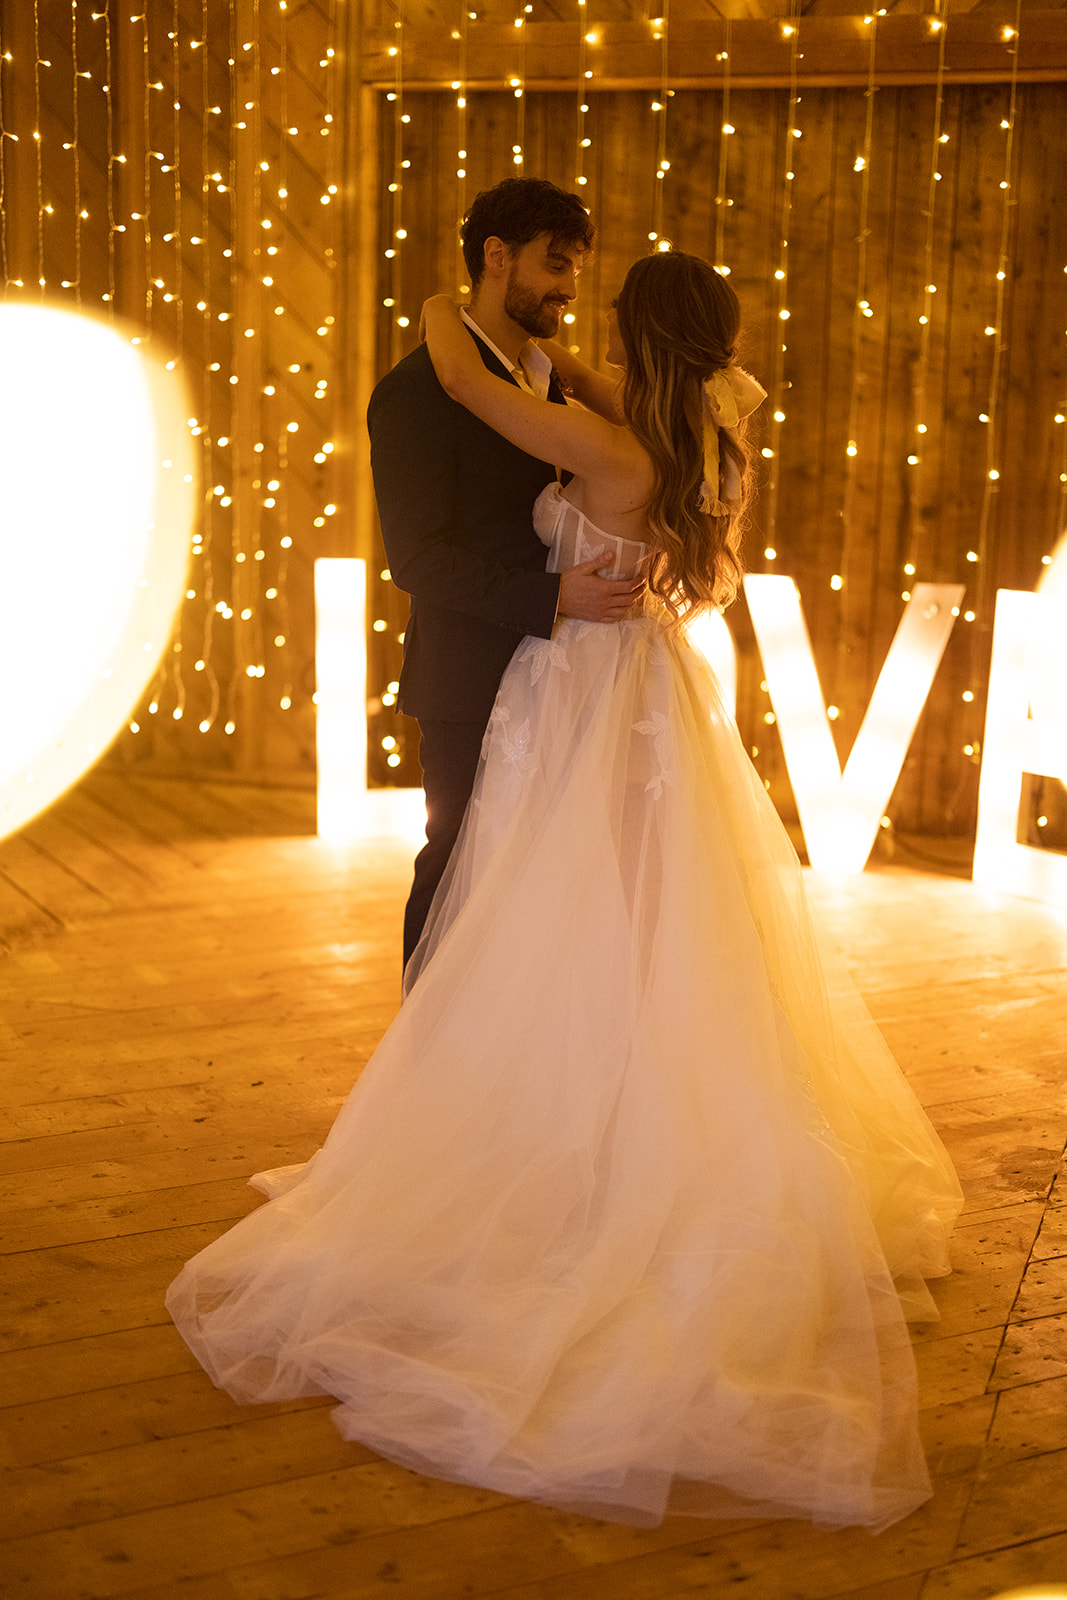 Romantic first dance under twinkle lights in a barn